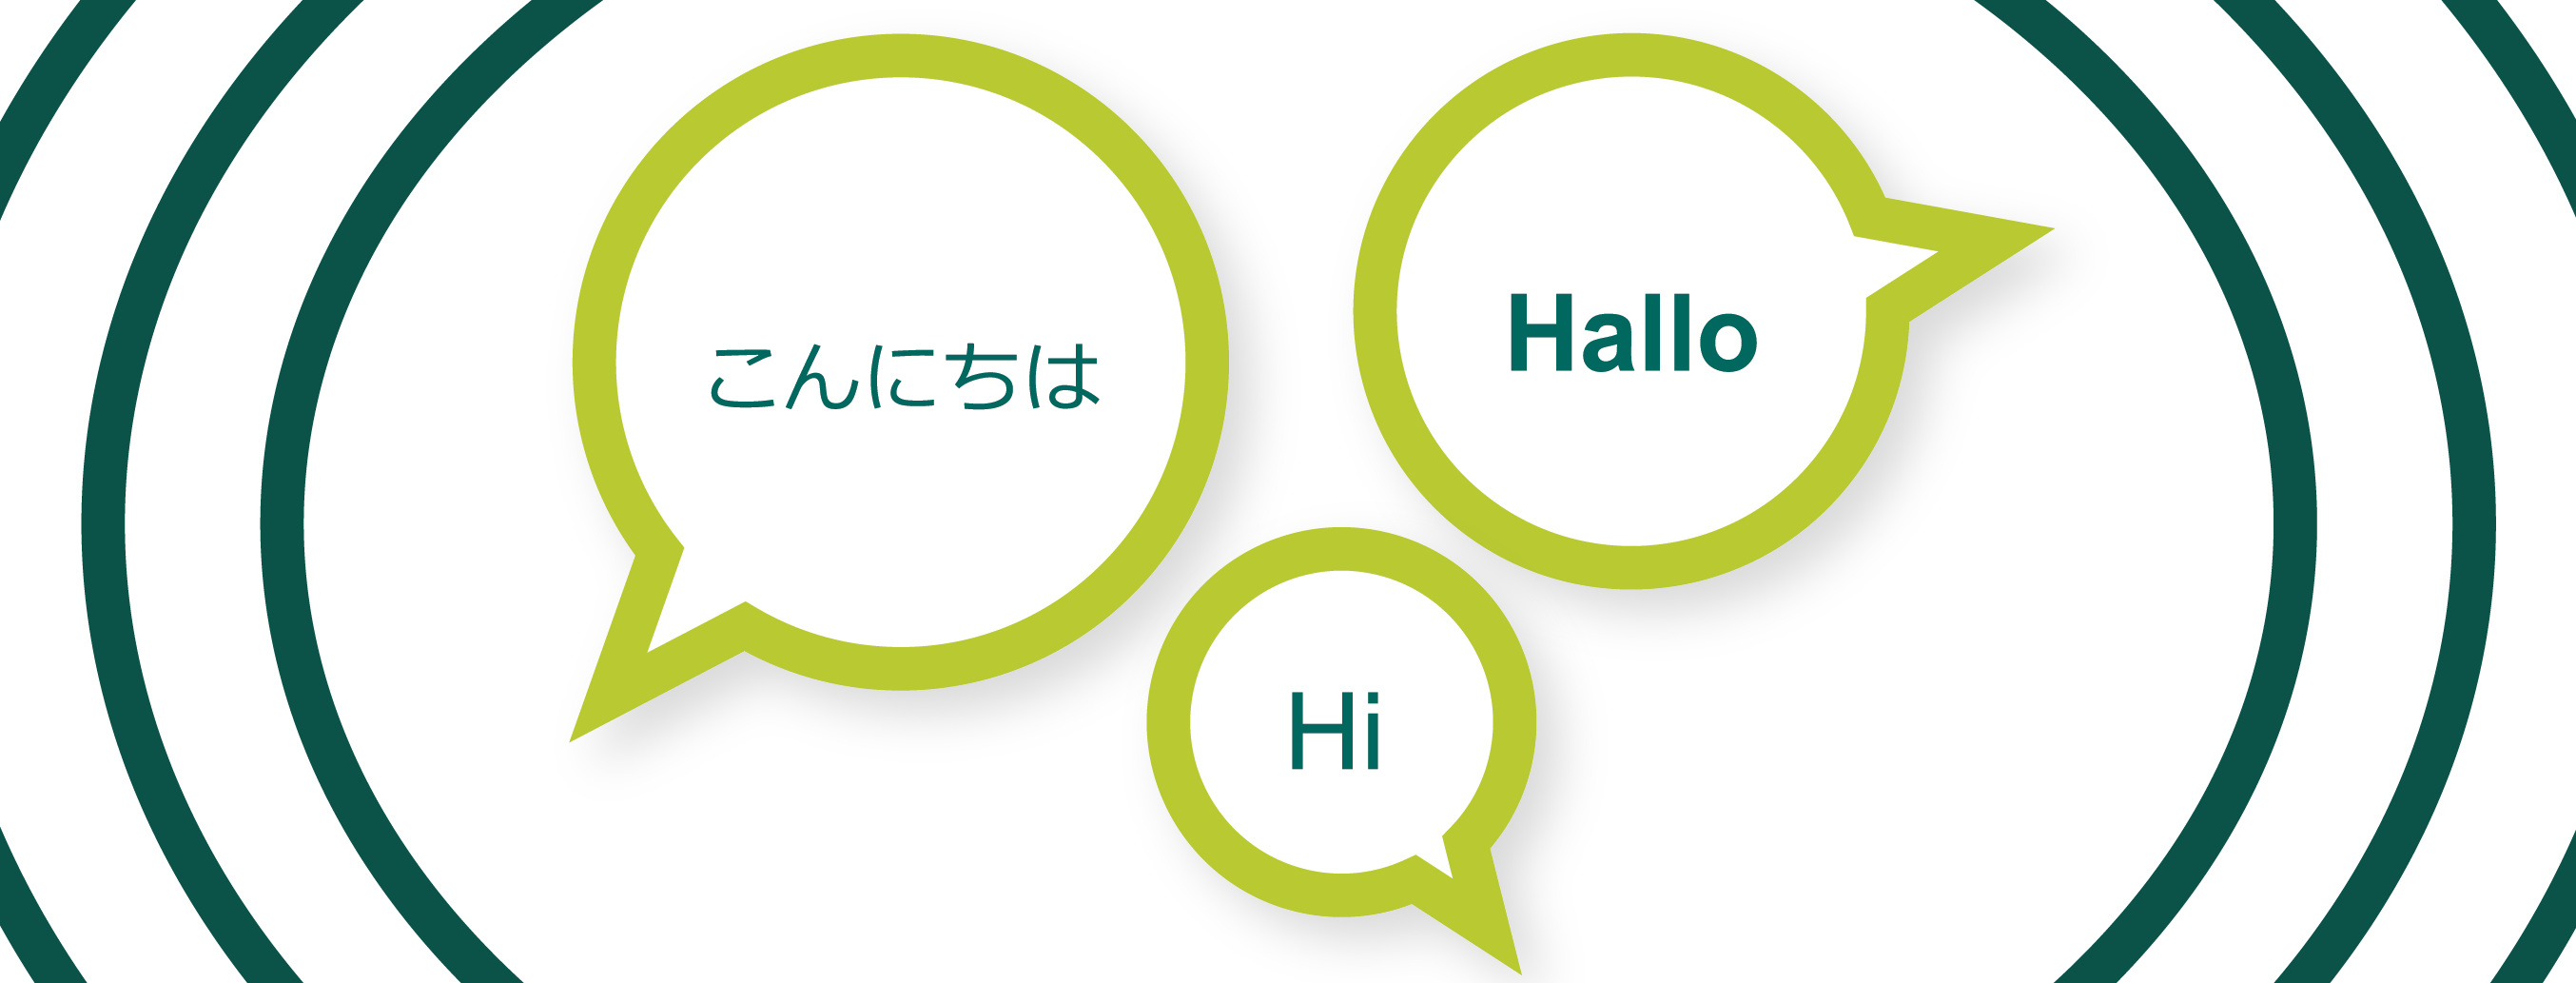 Illustration of three speech bubbles with "hello" in different languages.